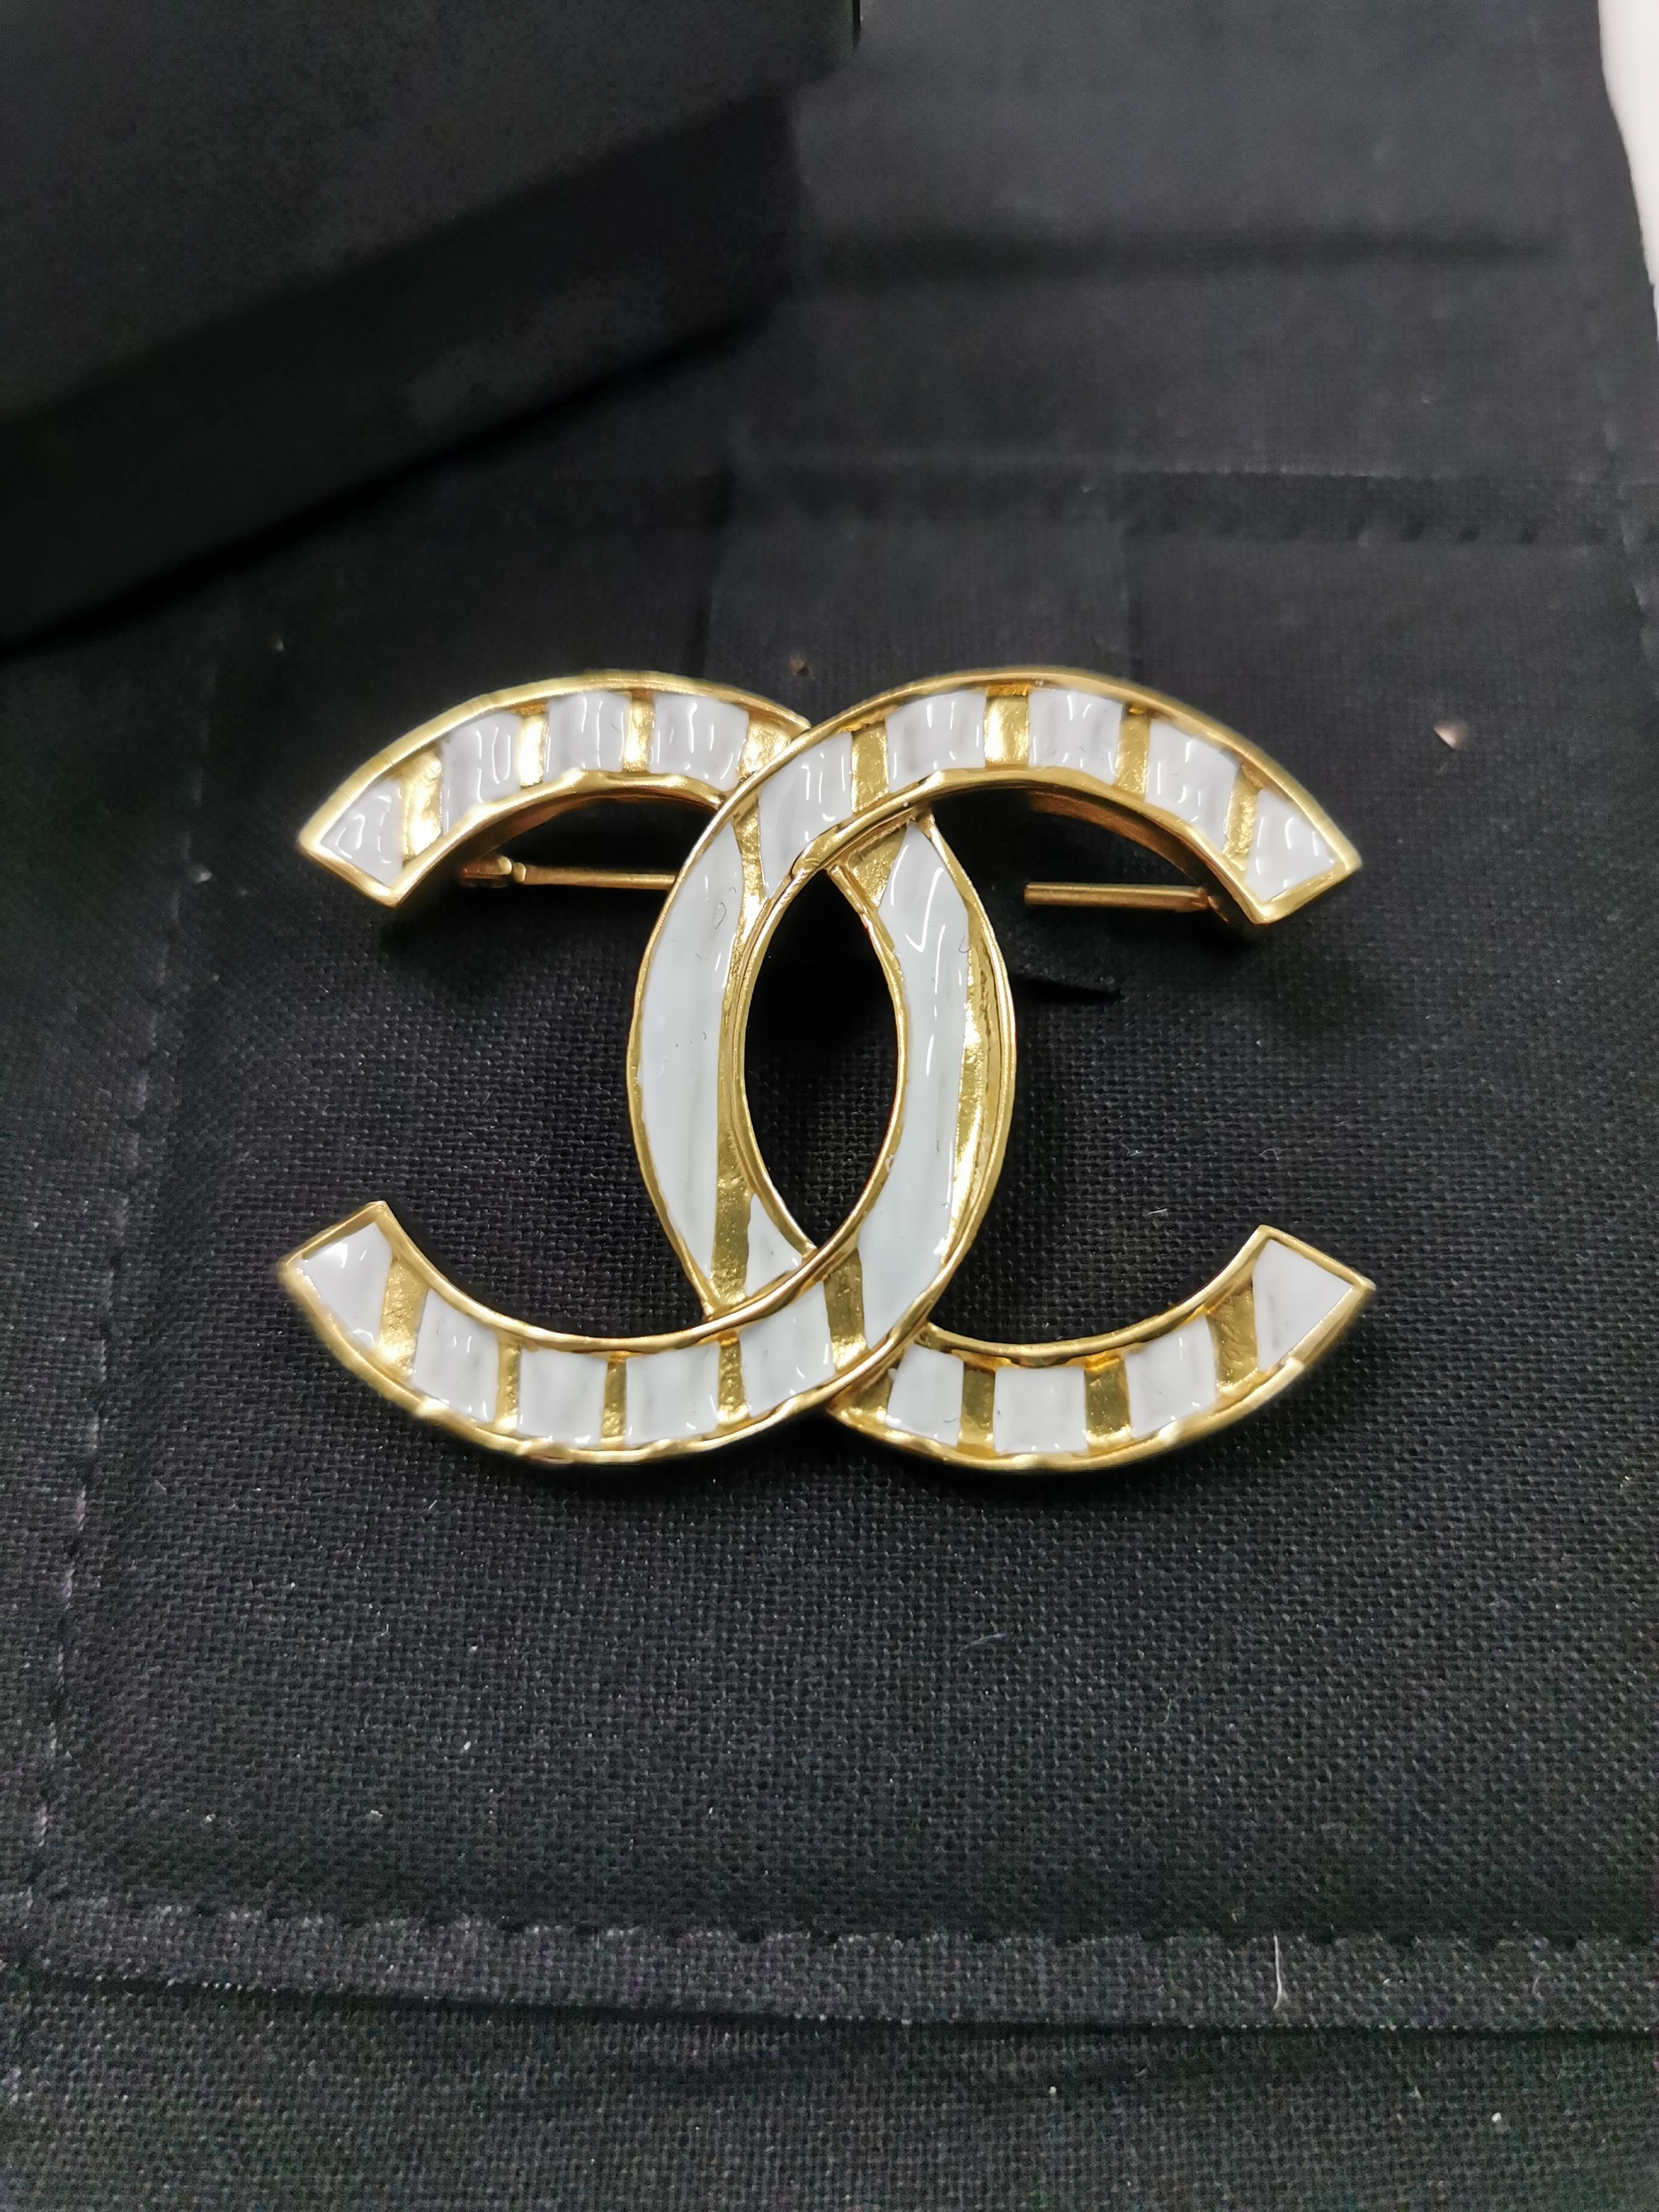 Introducing the Chanel 23 Gold Black Resin with Gold Foil CC Large Brooch, a stunning accessory that captures the essence of Chanel's timeless elegance and impeccable craftsmanship. This brooch is a true statement piece that exudes sophistication